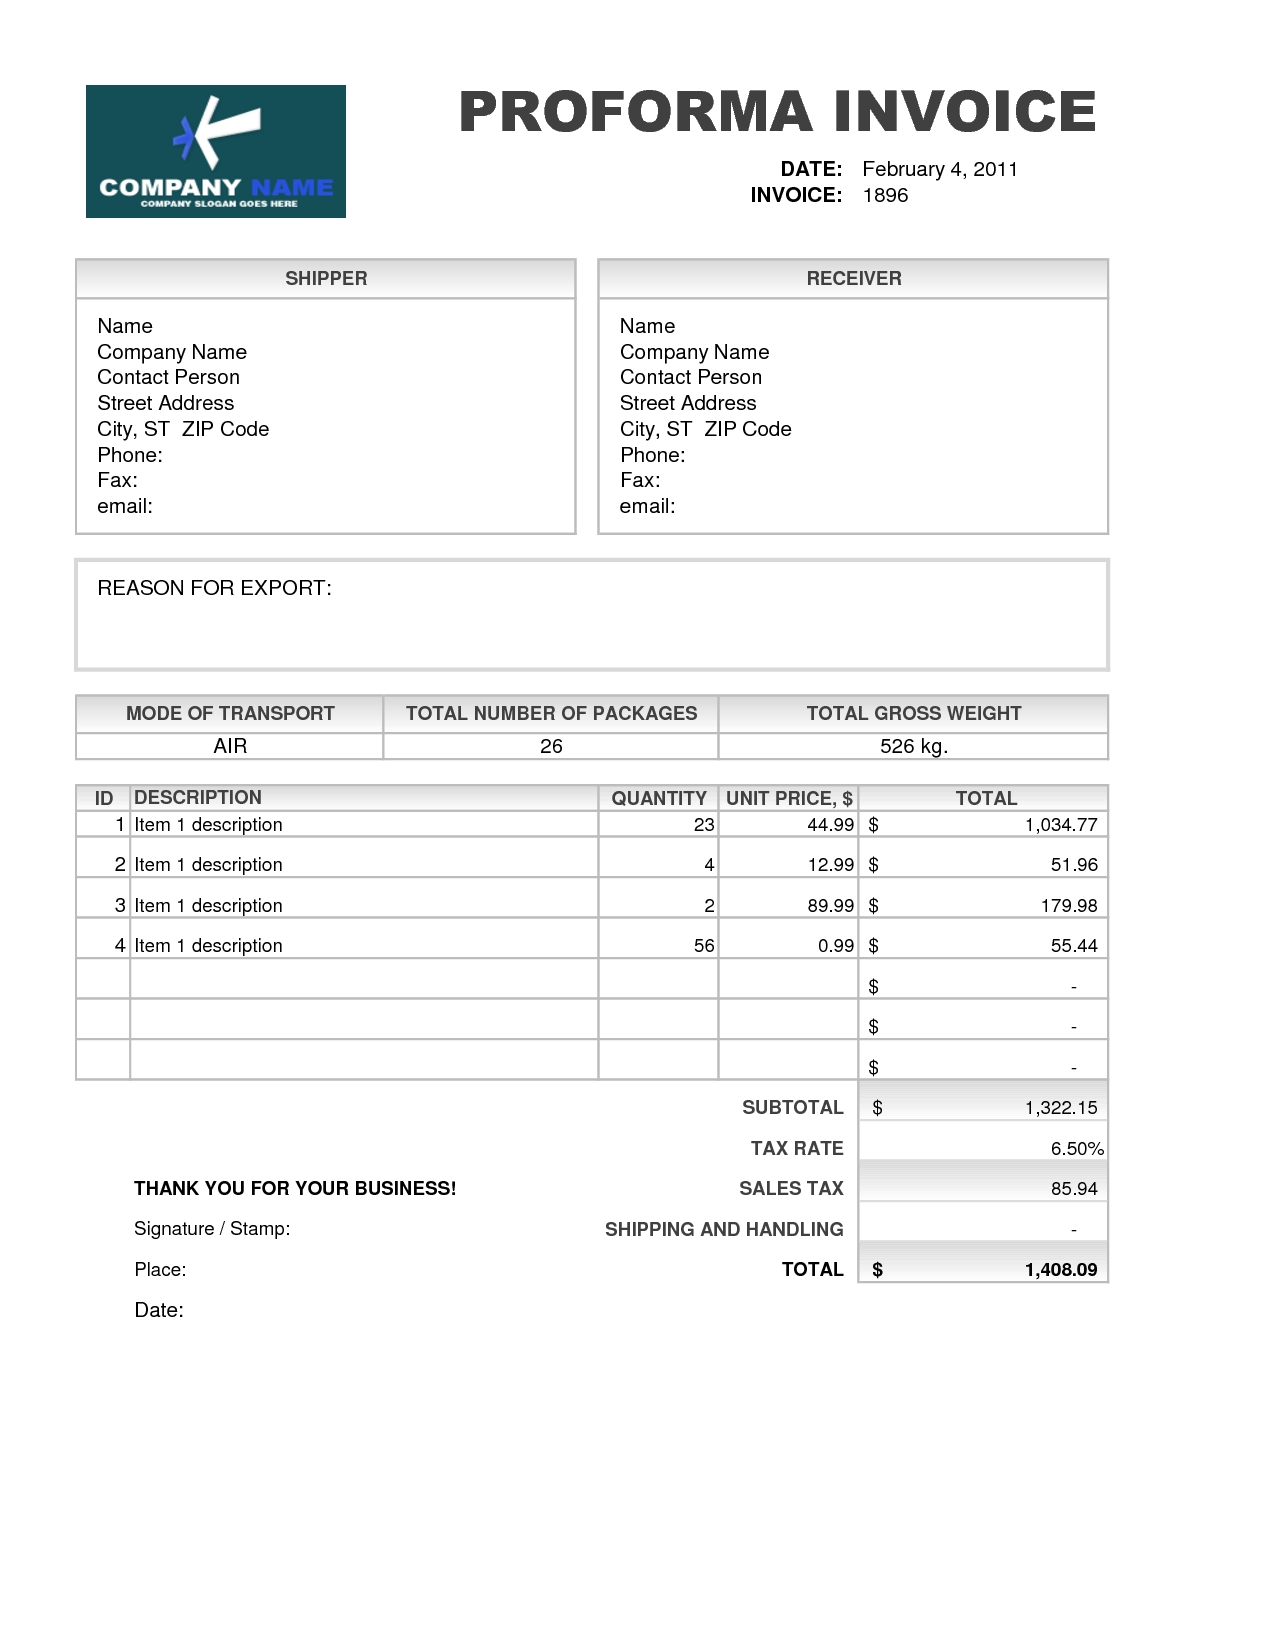 pro forma invoice pro forma invoice example counseldynu 1275 X 1650